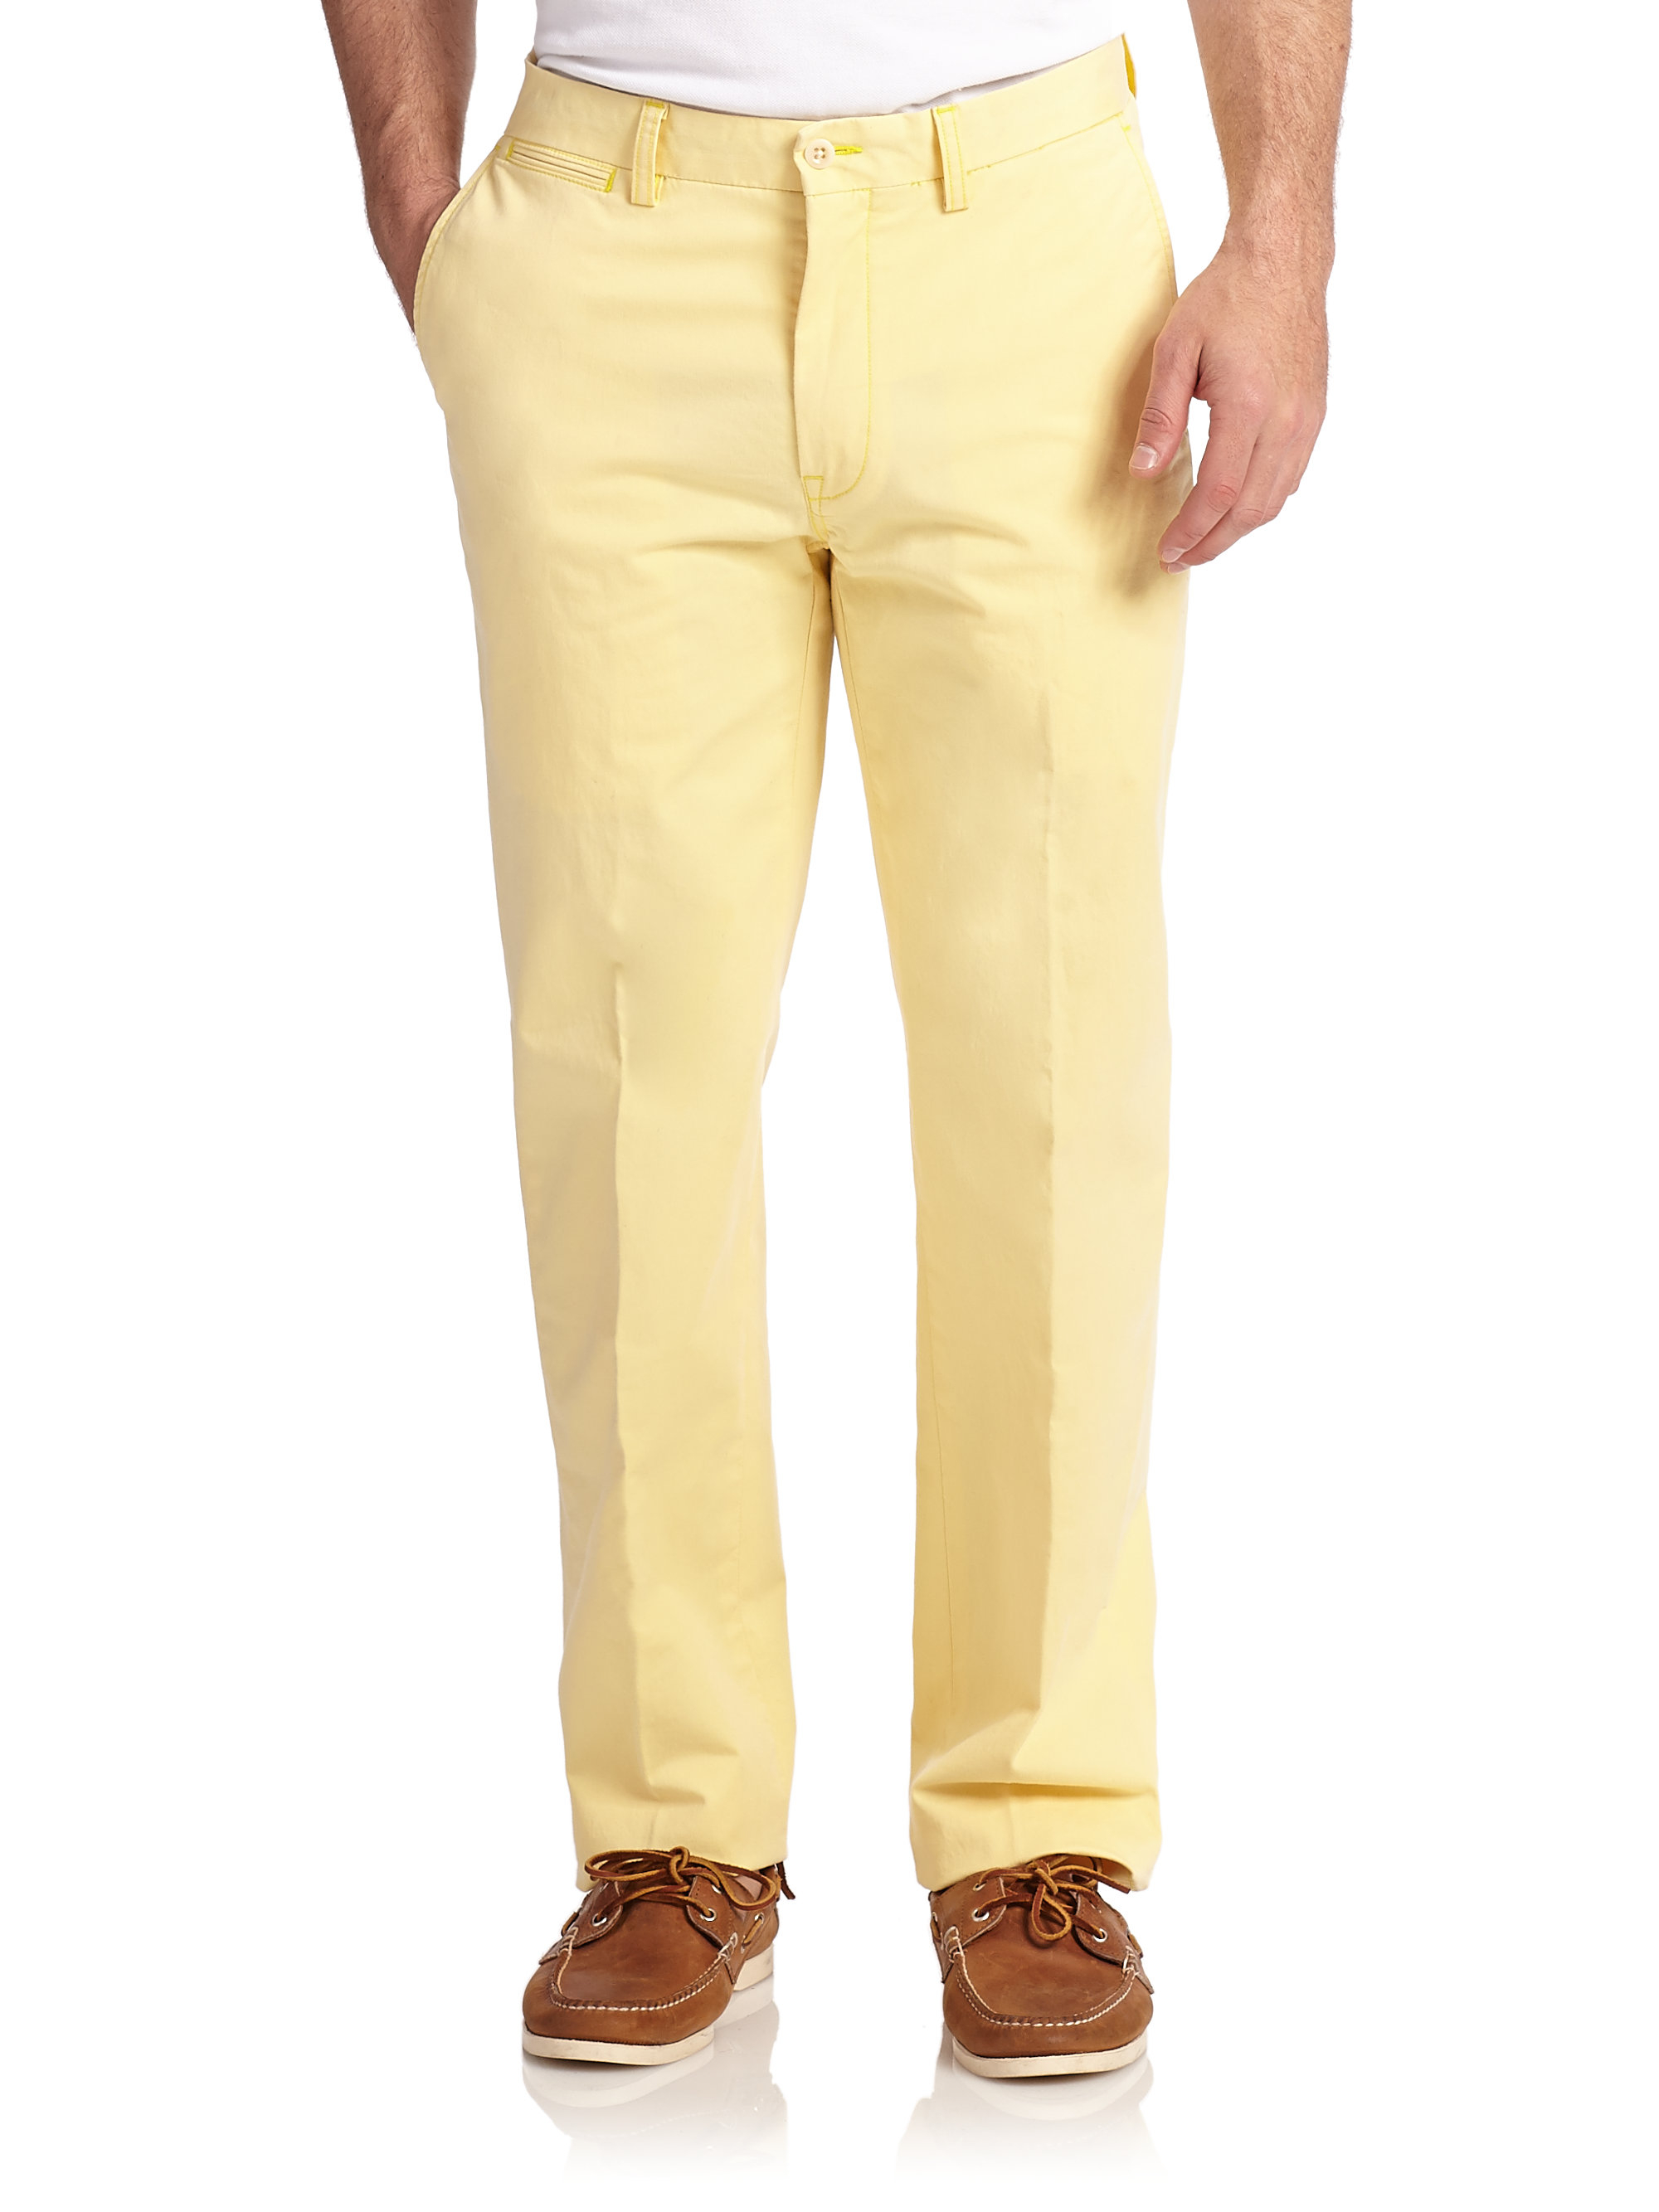 Lyst - Polo Ralph Lauren Classic-fit Lightweight Chino Pants in Yellow ...